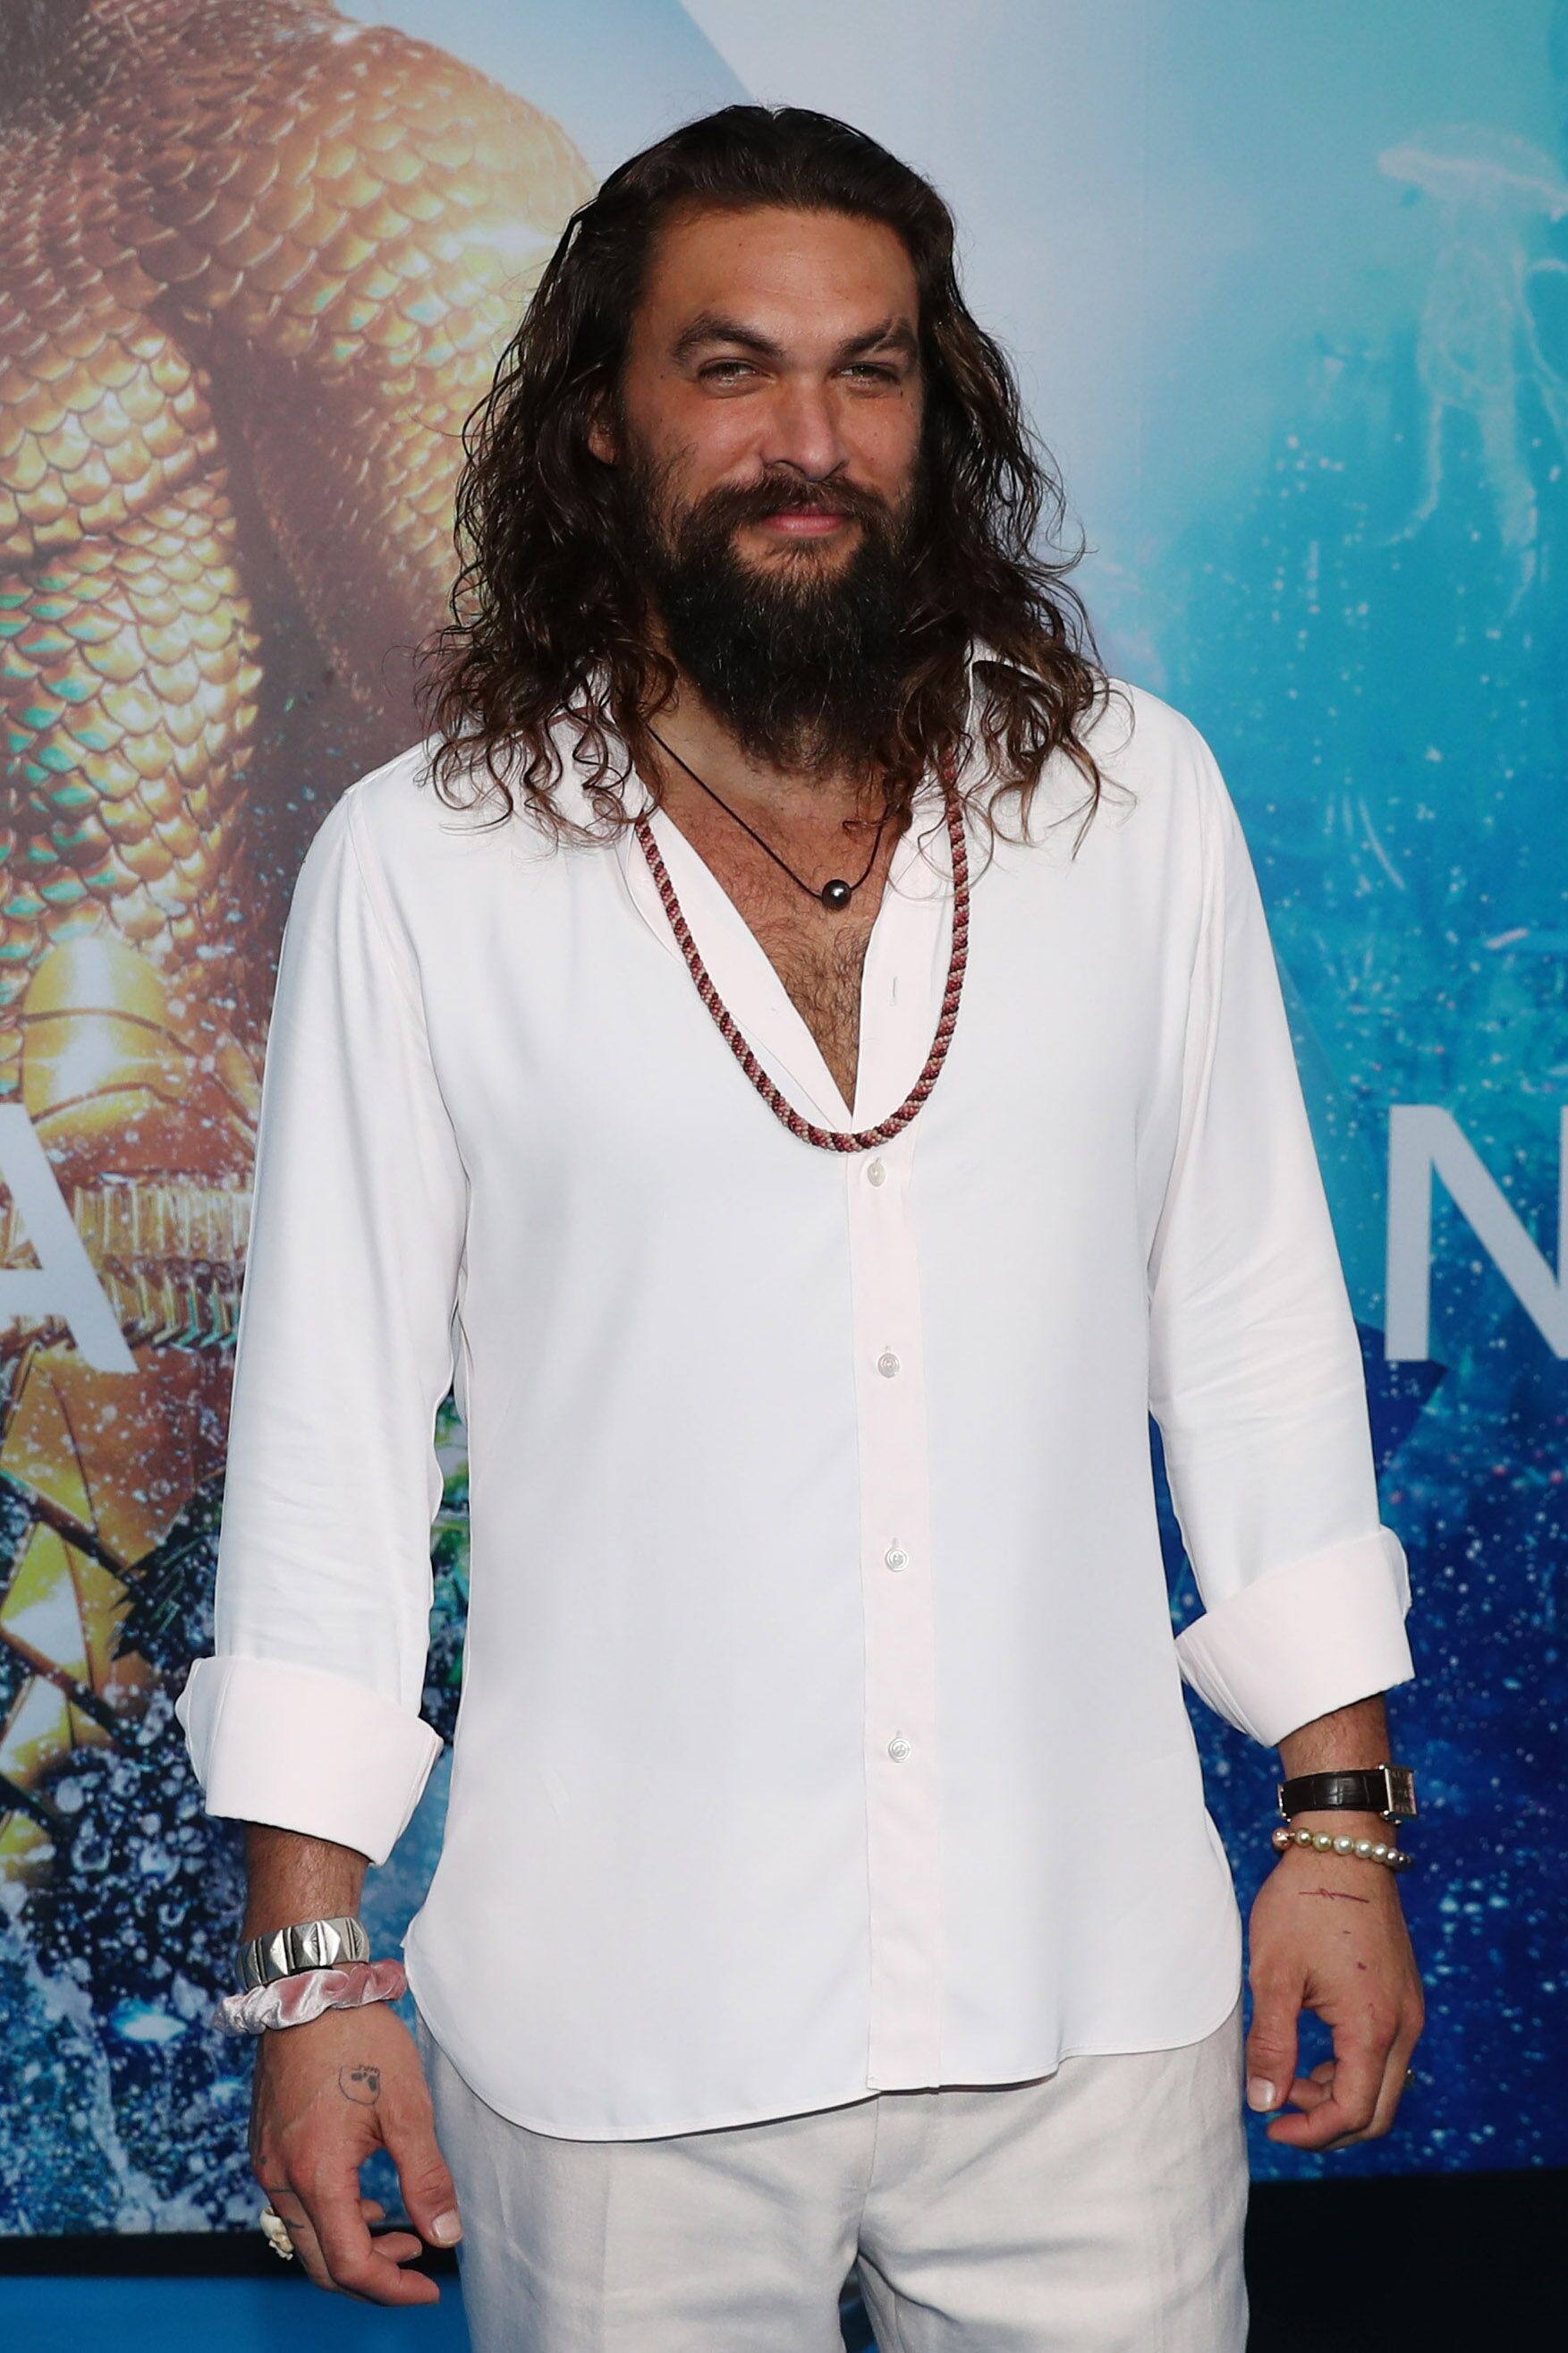 Jason Momoa at the "Aquaman" premiere. | Source: Getty Images